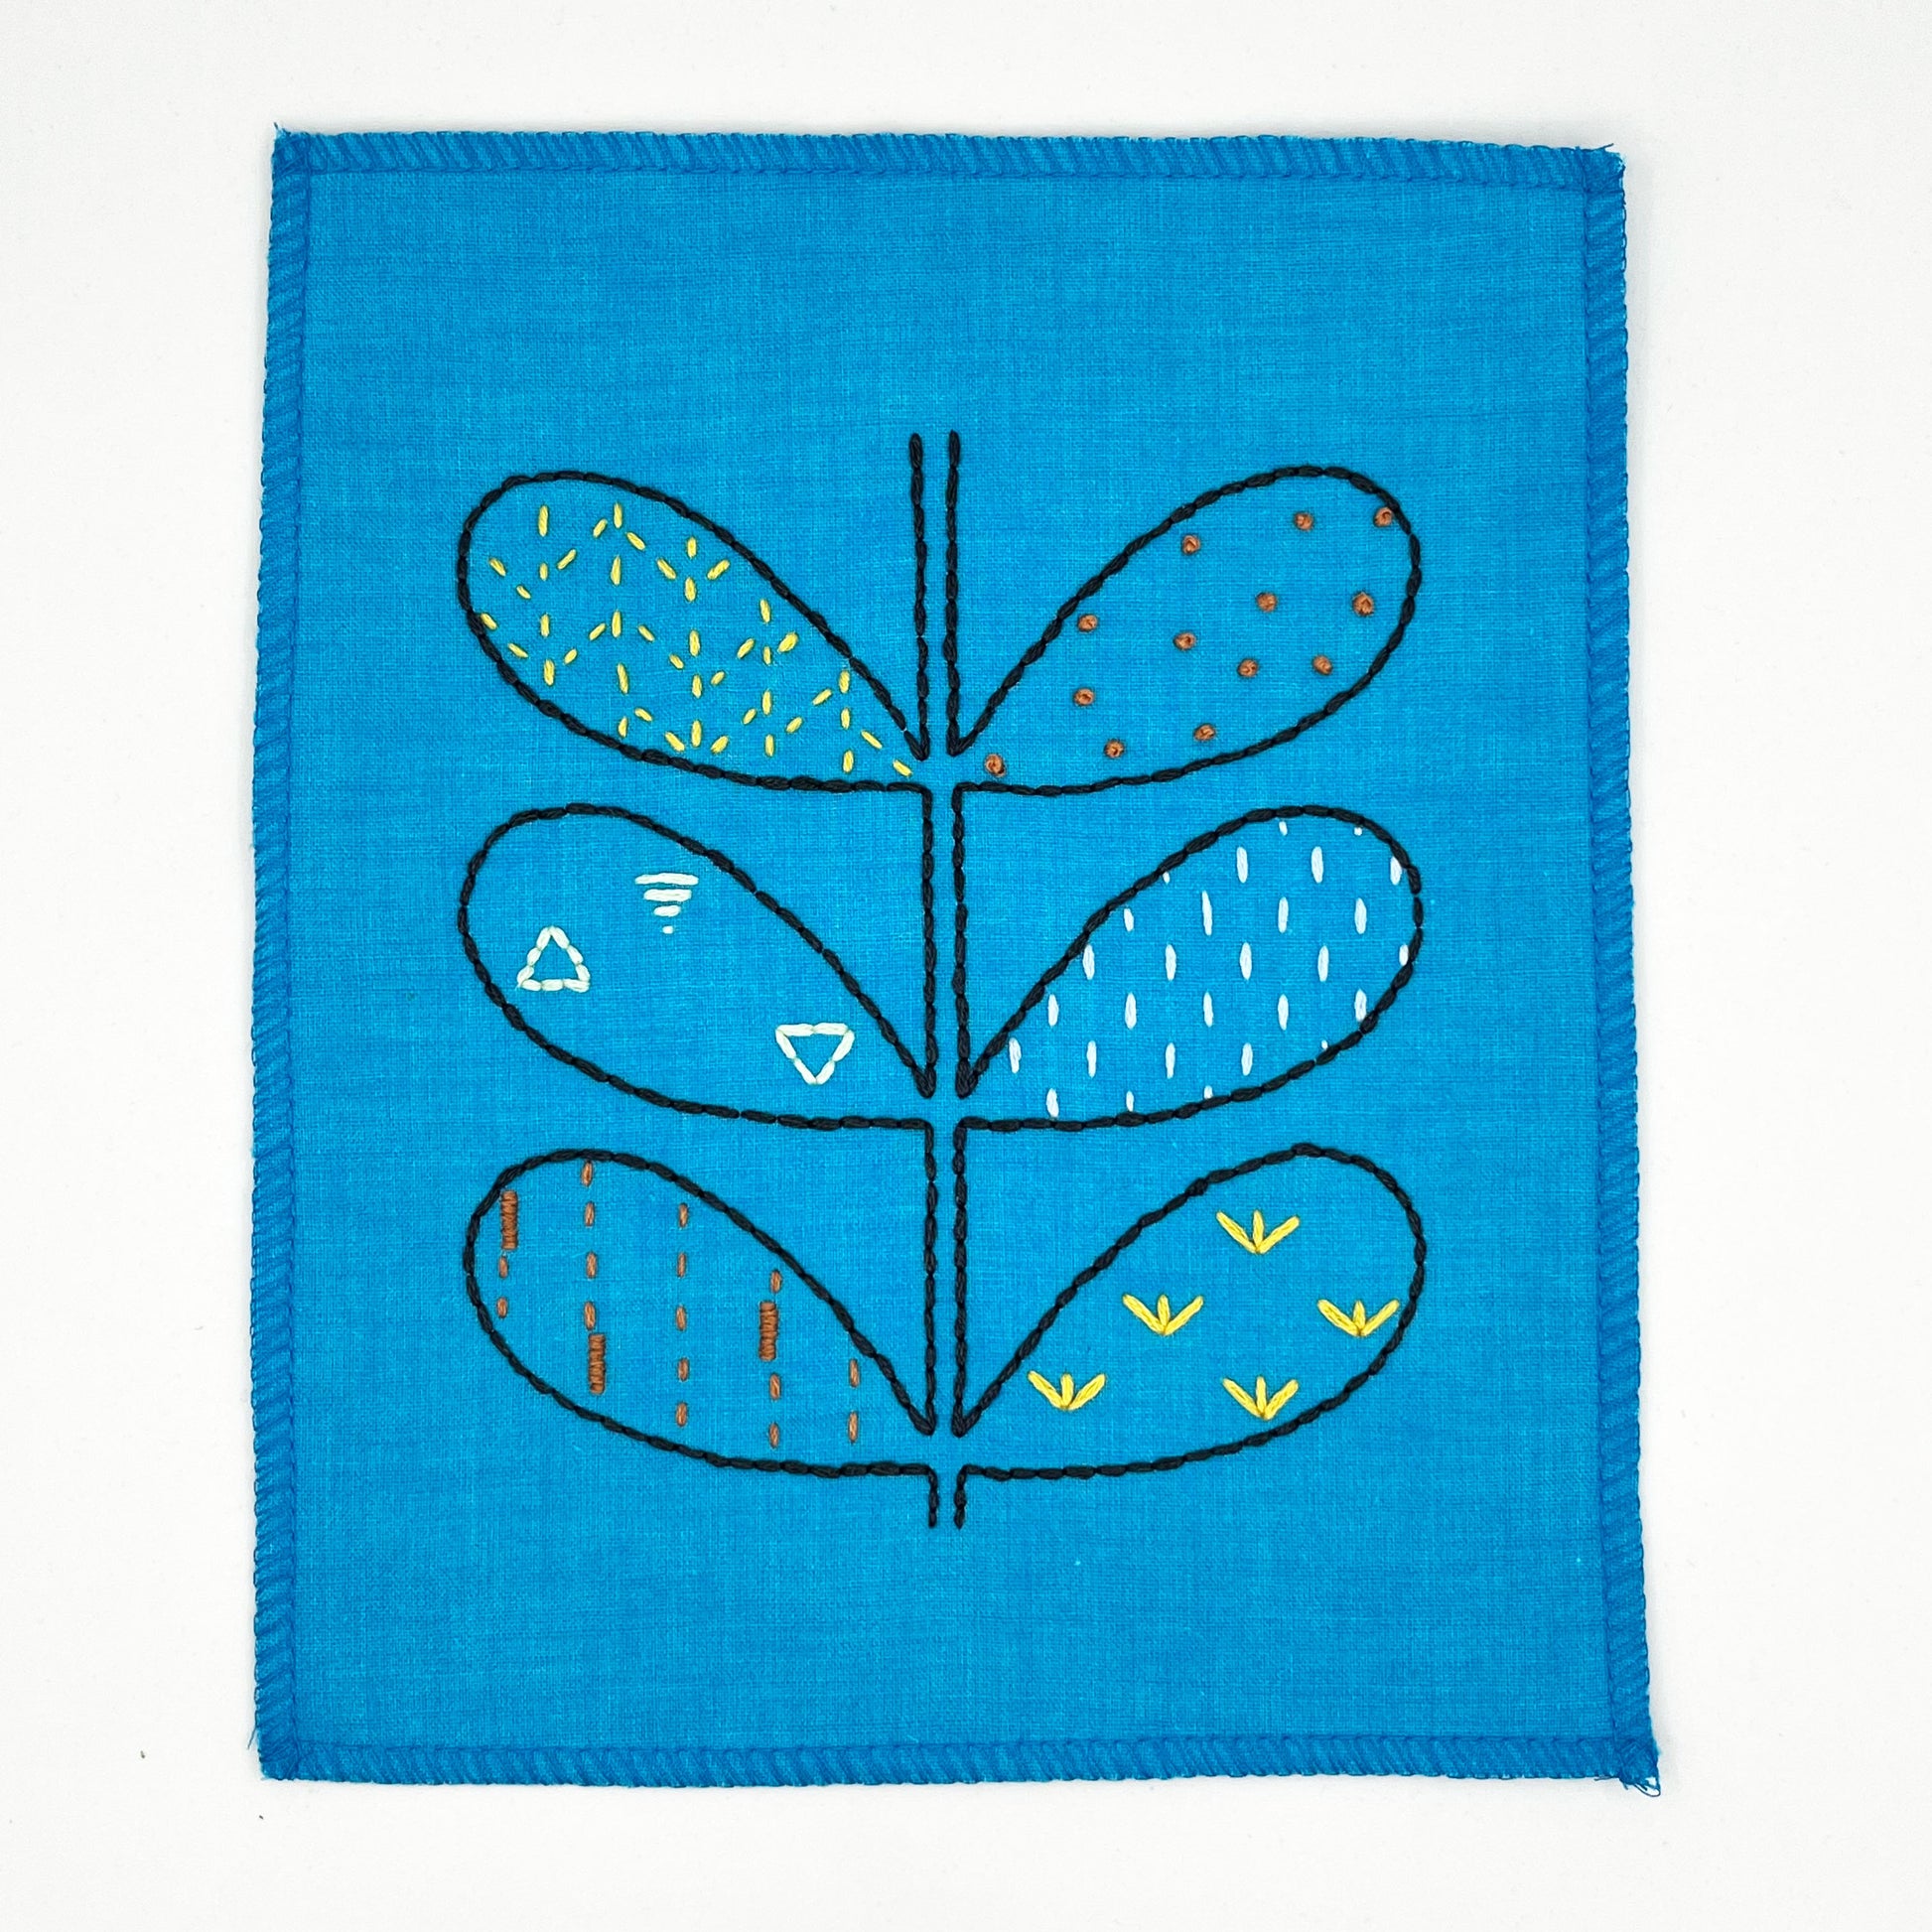 small bright blue fabric wall hangings, hand embroidered with the outline of symmetrical petals on a stem in navy, each petal filled with different stitches like french knots, running stitches and triangles, in different colors, on a white background